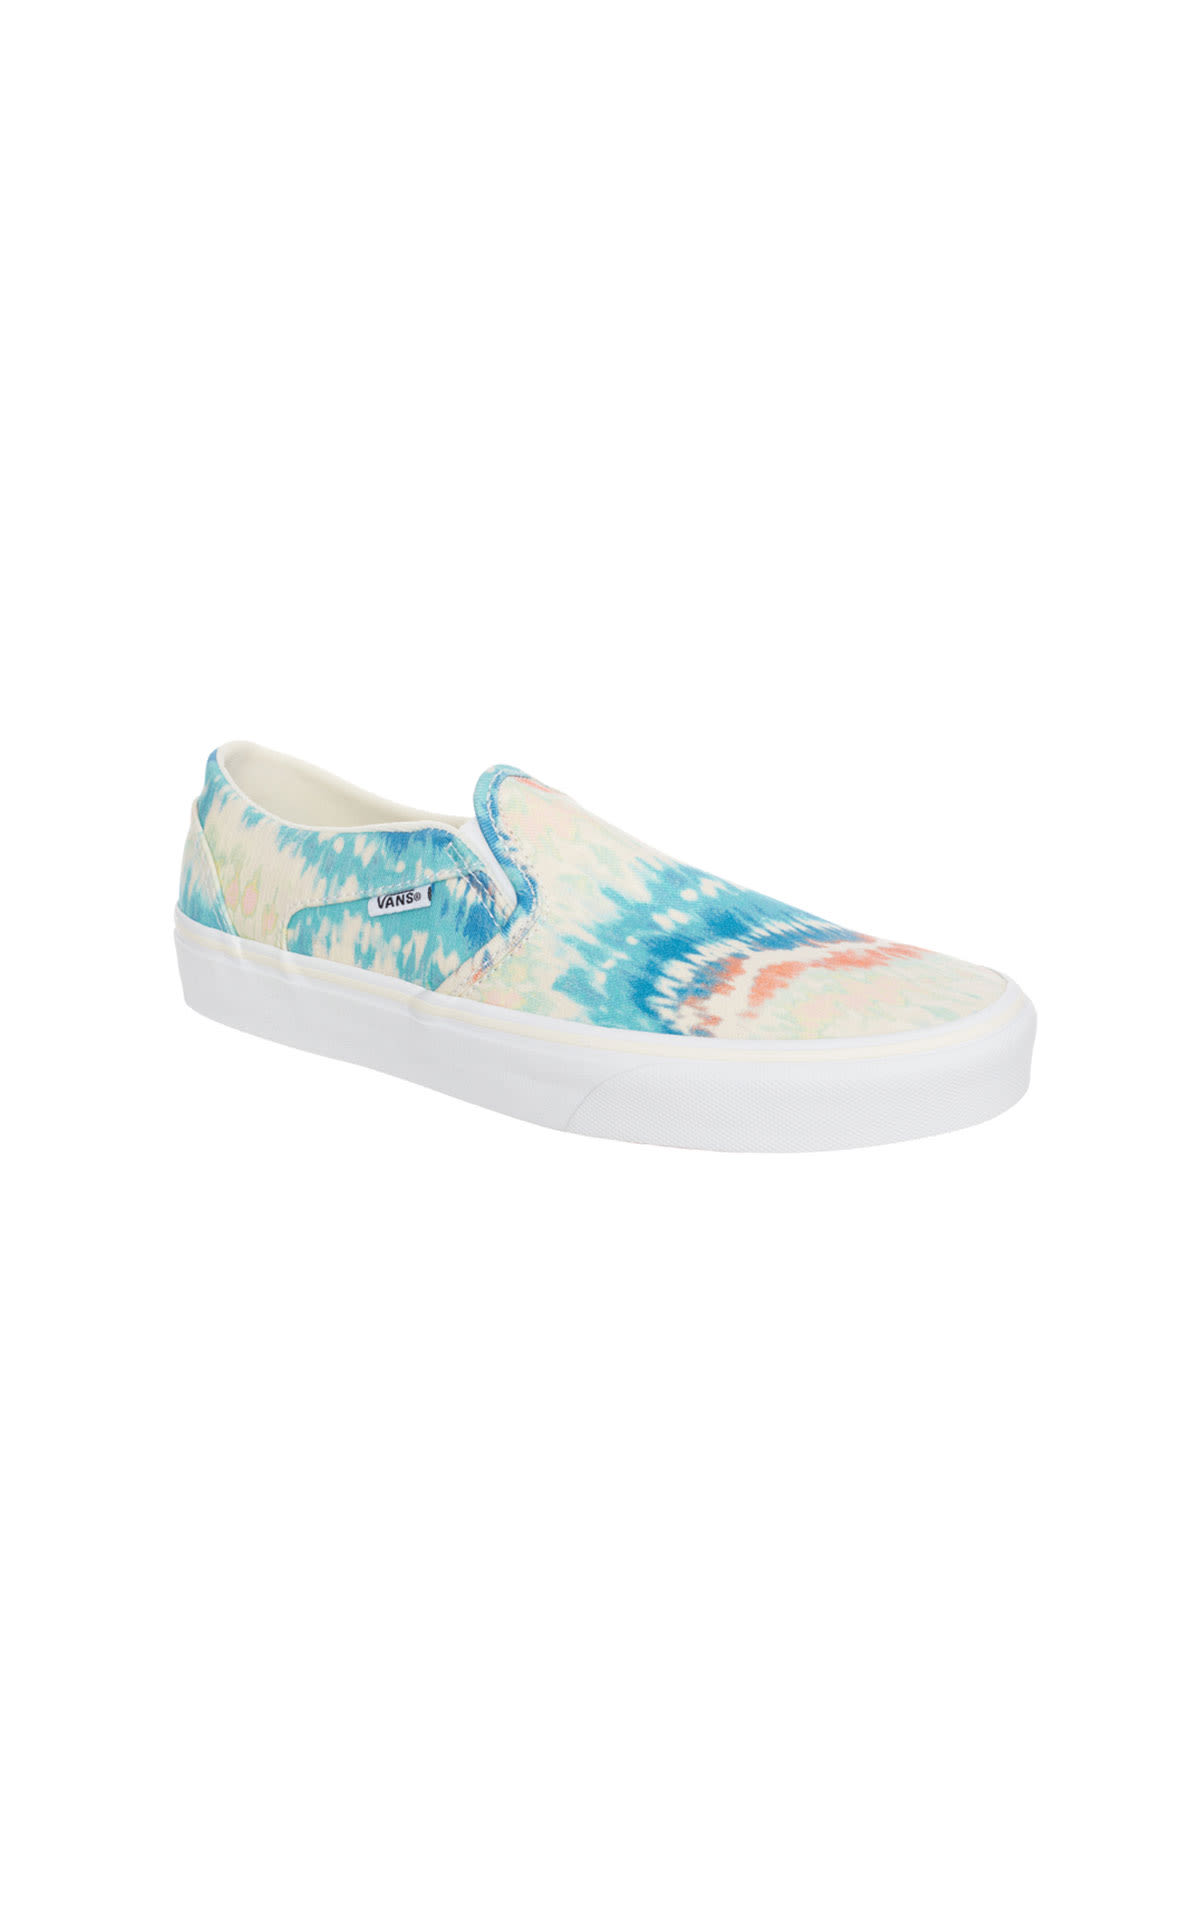 Vans Asher psychadelic slip on trainers from Bicester Village